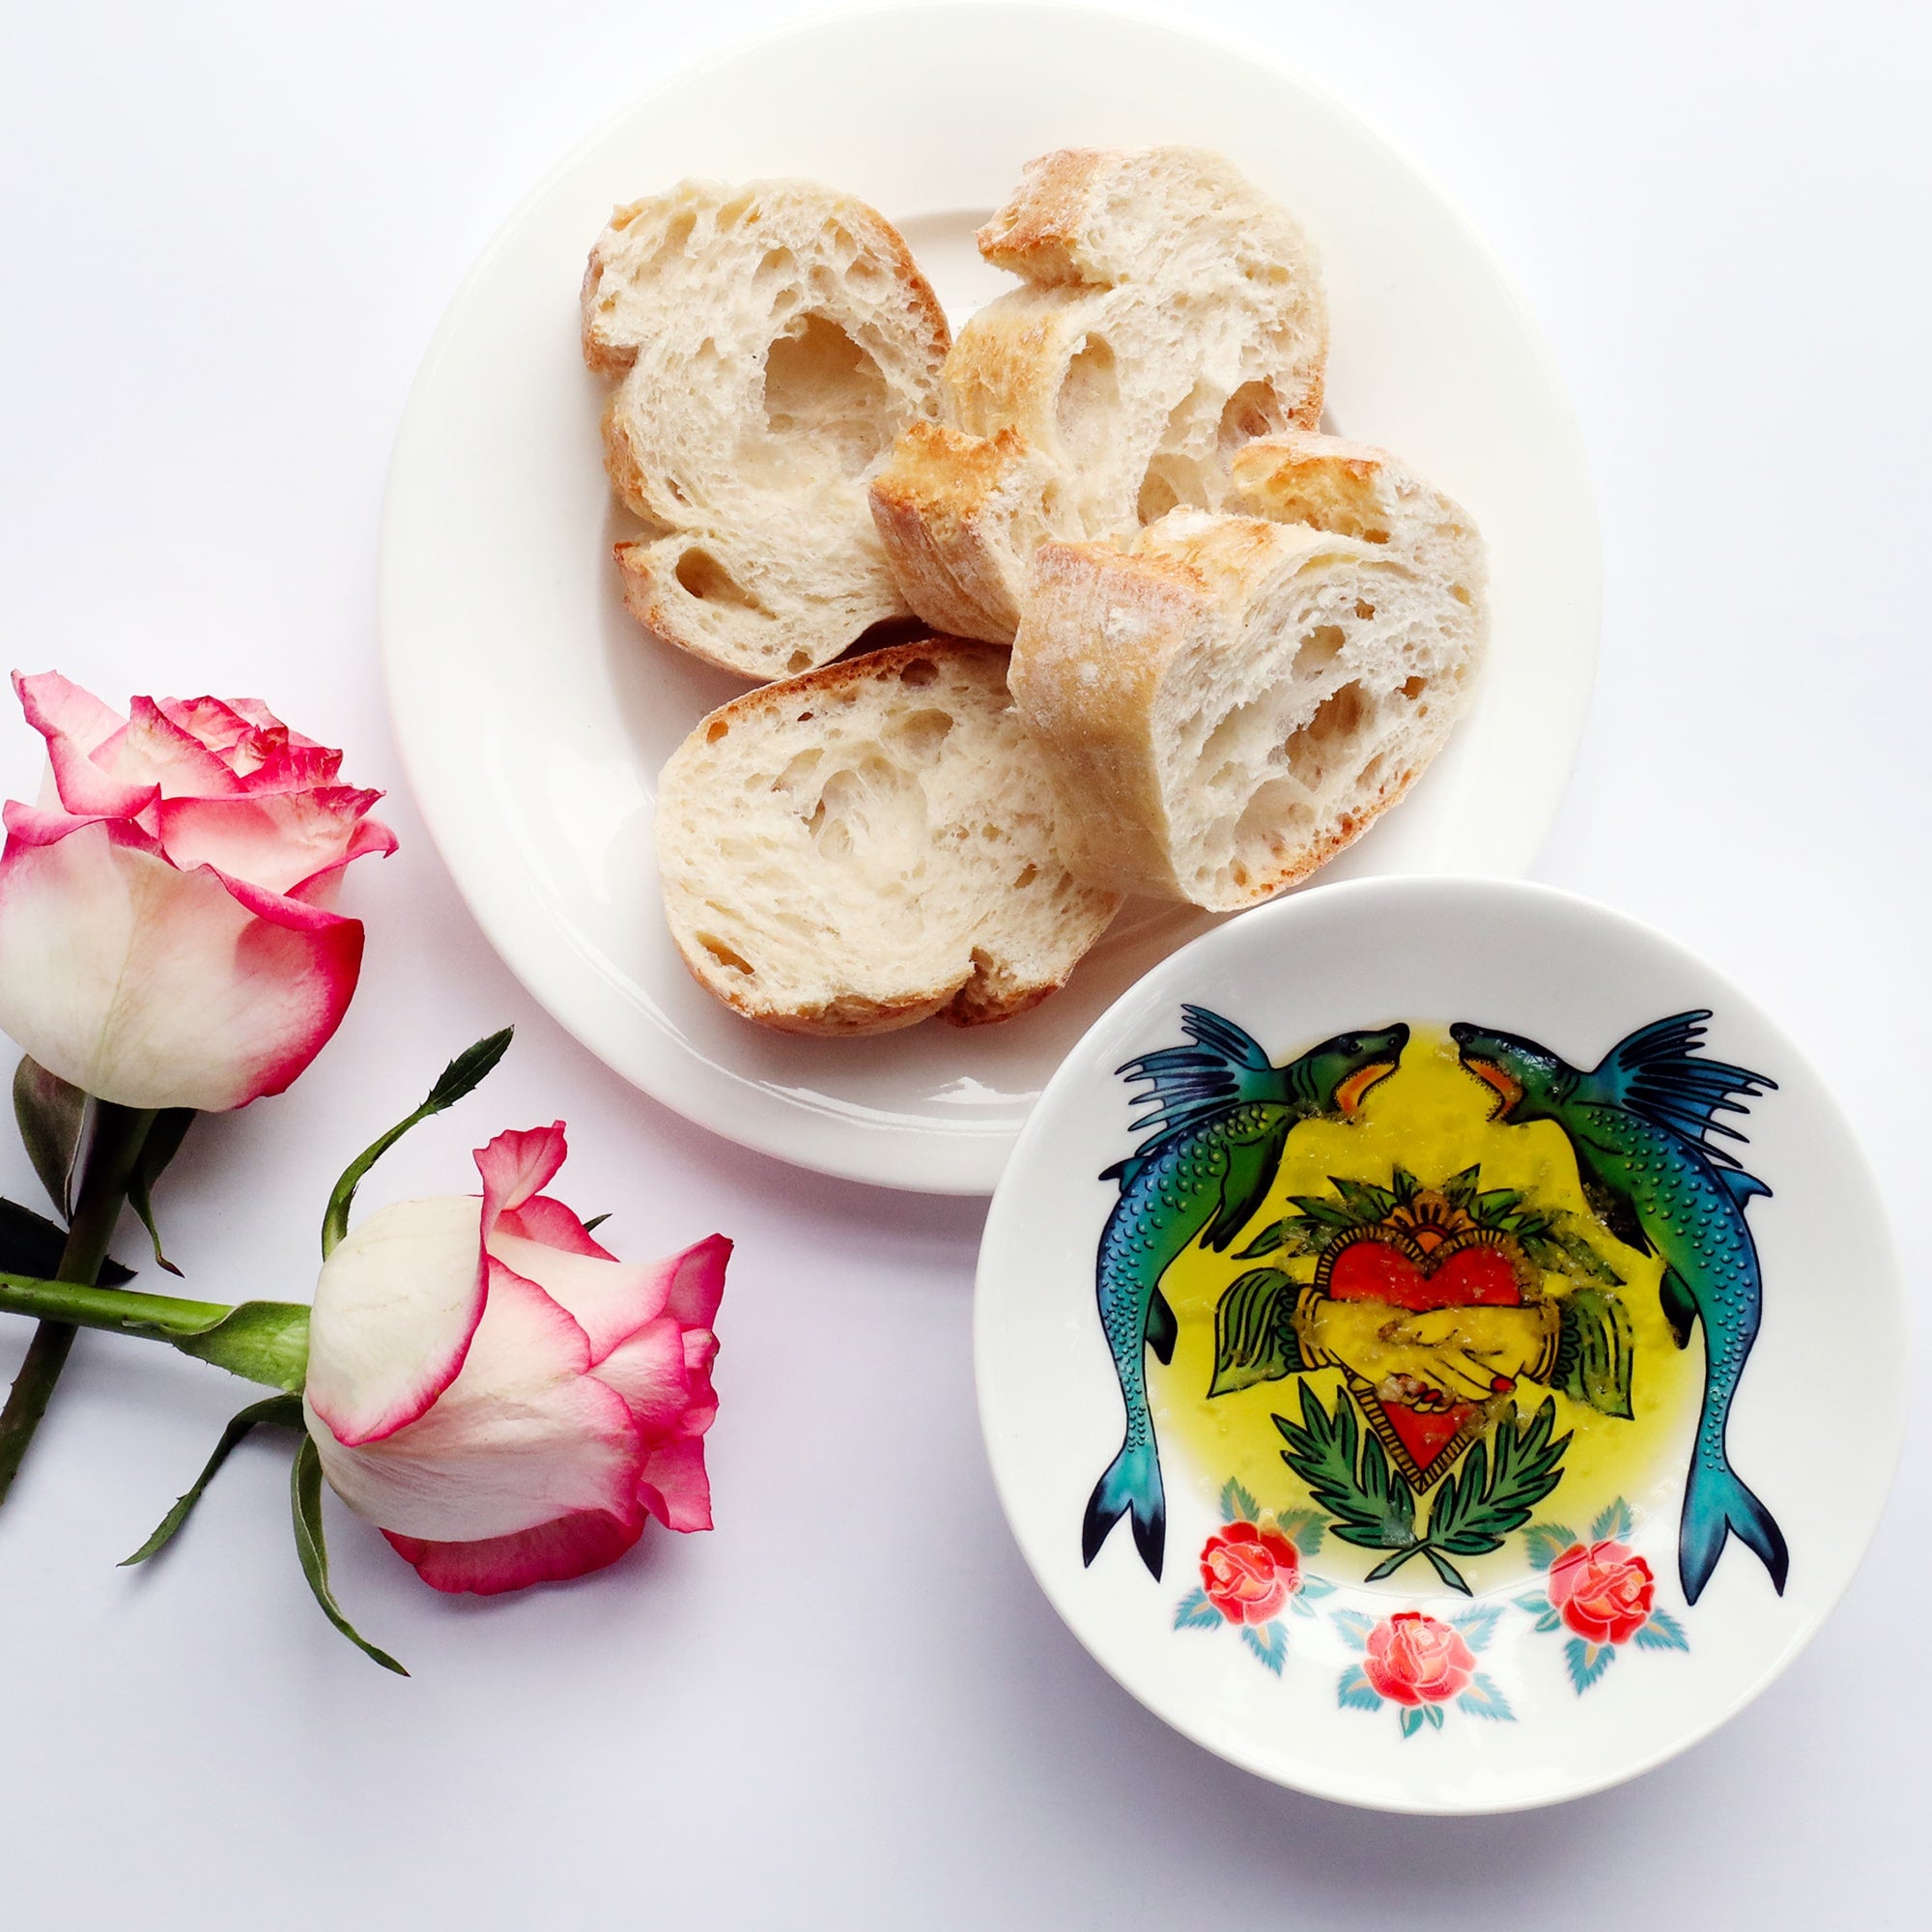 Nibbles dish decorated in shark, heart and roses design inspired by tattoos, filled with olive oil and salt. There is a plate of bread next to the dish and 2 pink and white roses.